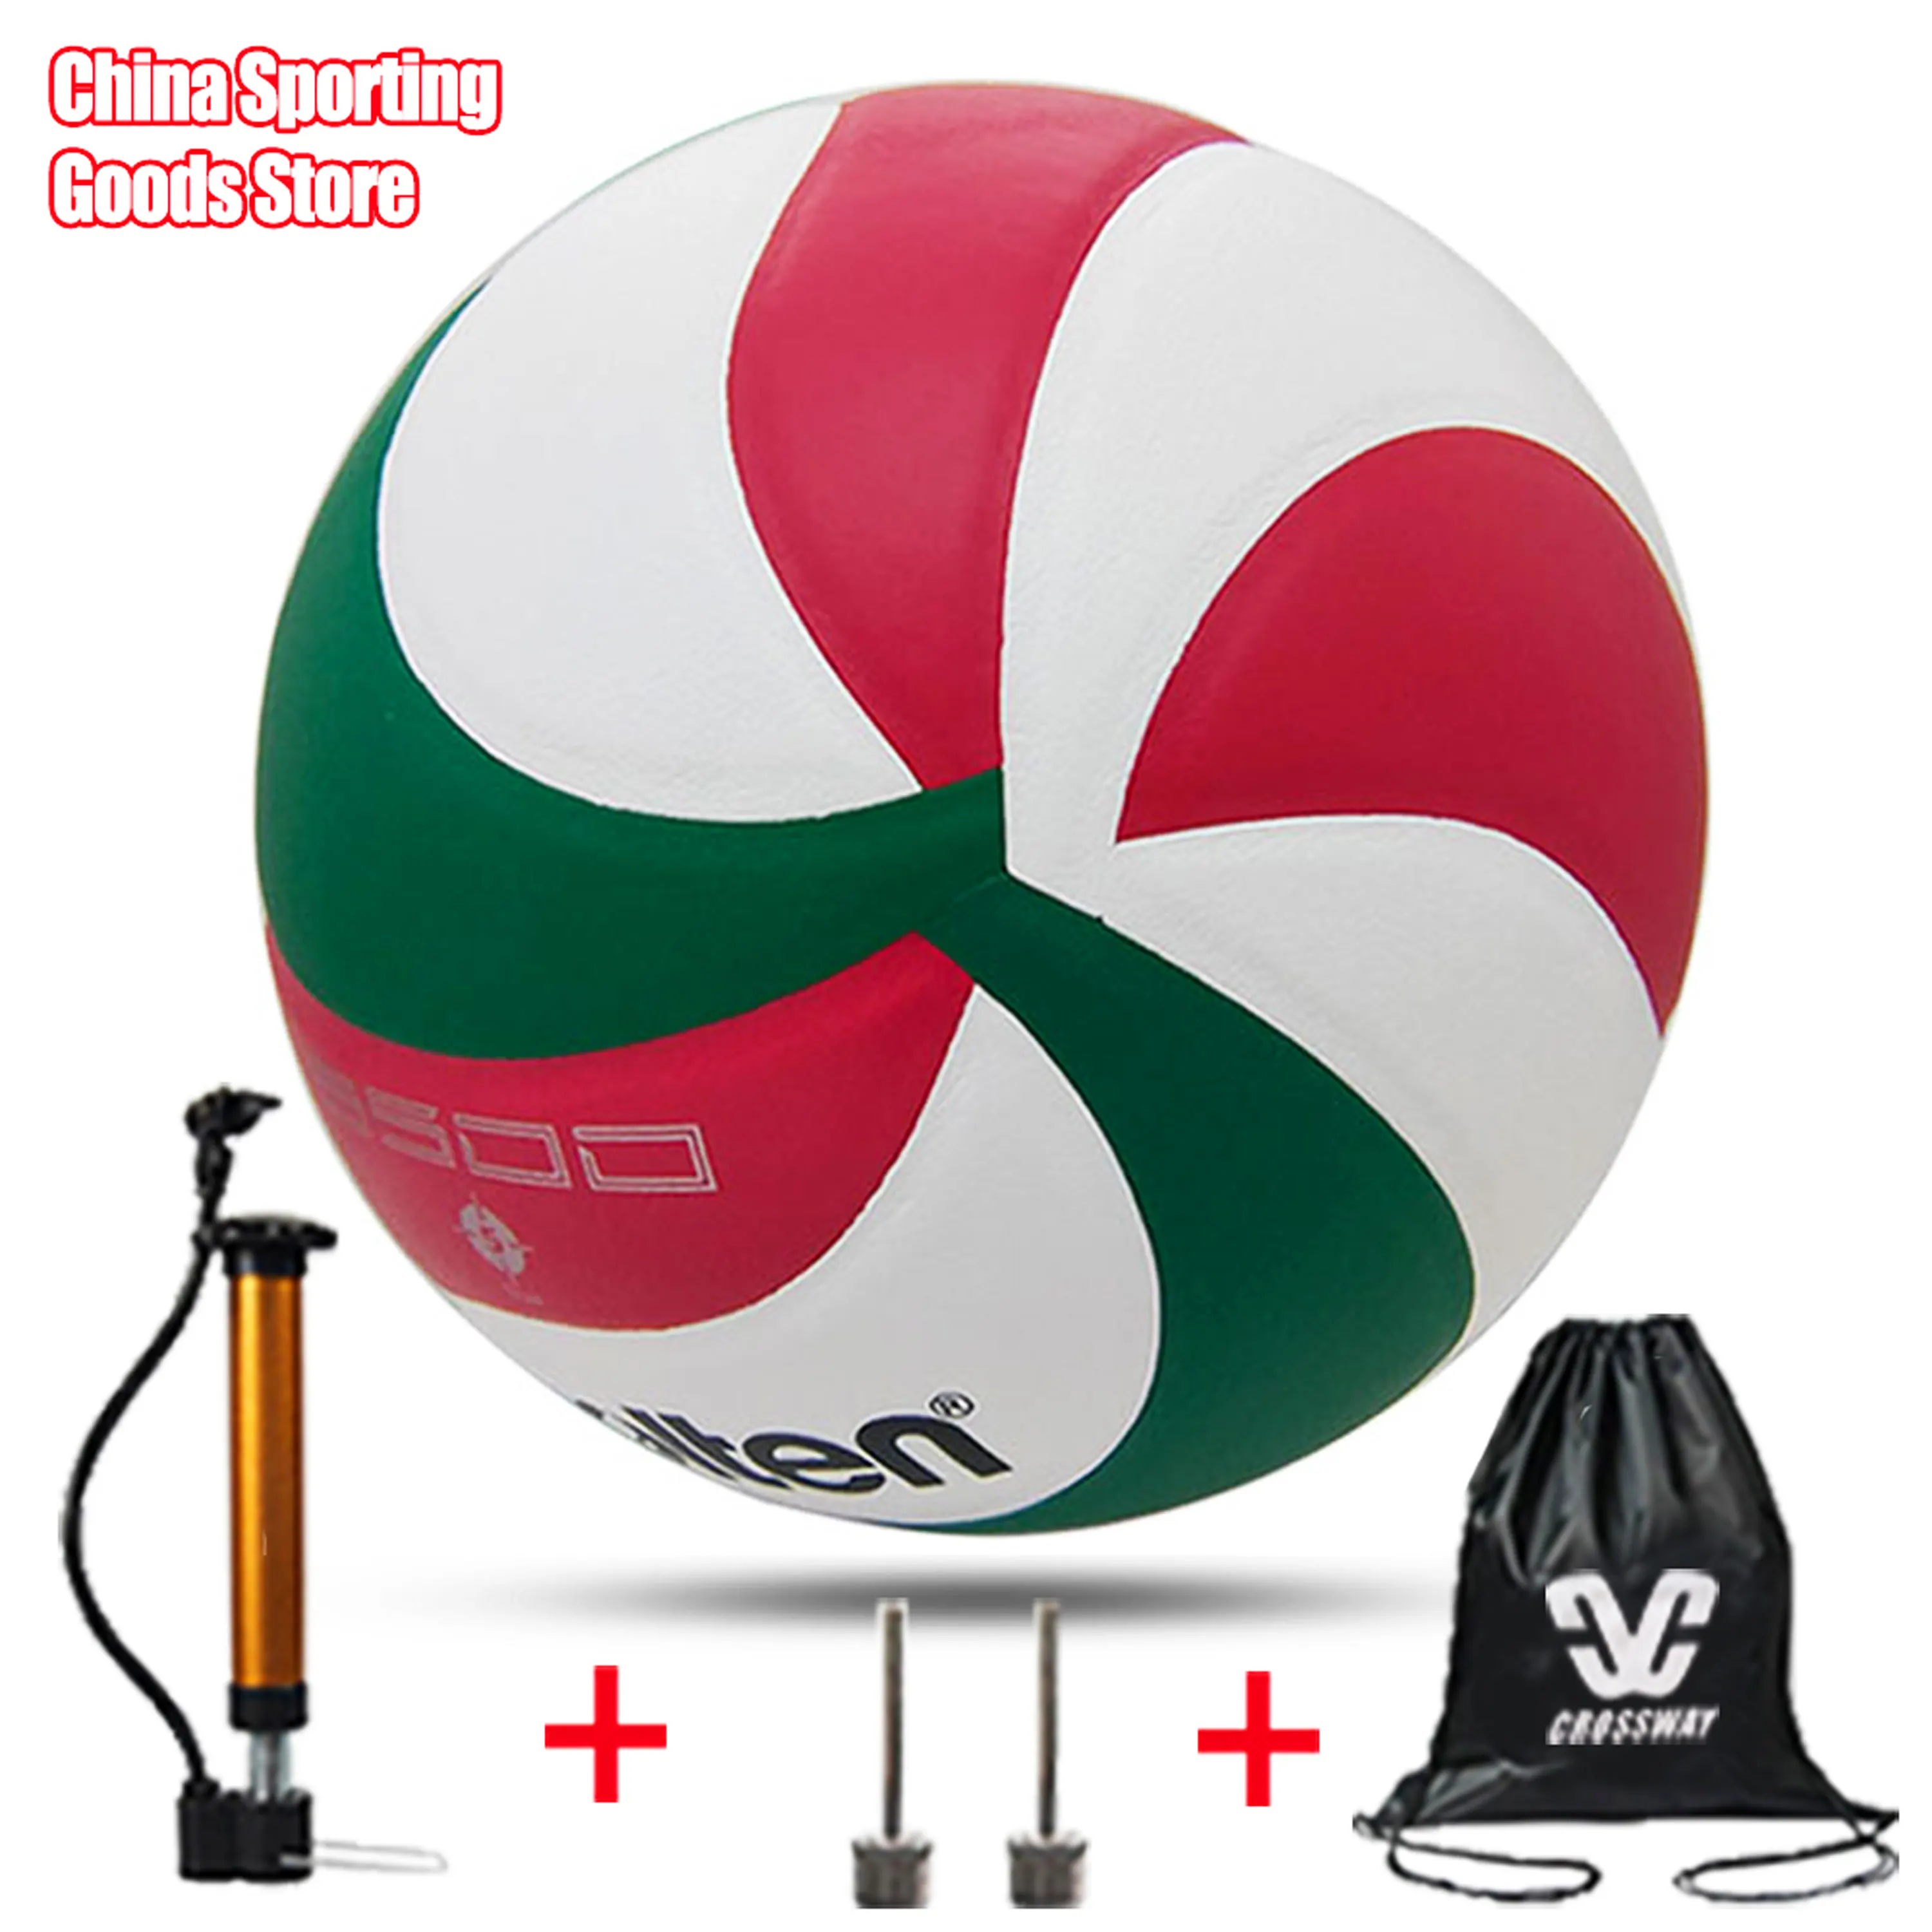 Printing Volleyball ball,Model5500,Size 5, Christmas Gift Volleyball, Outdoor Sports, Training,Optional Pump + Needle + Bag